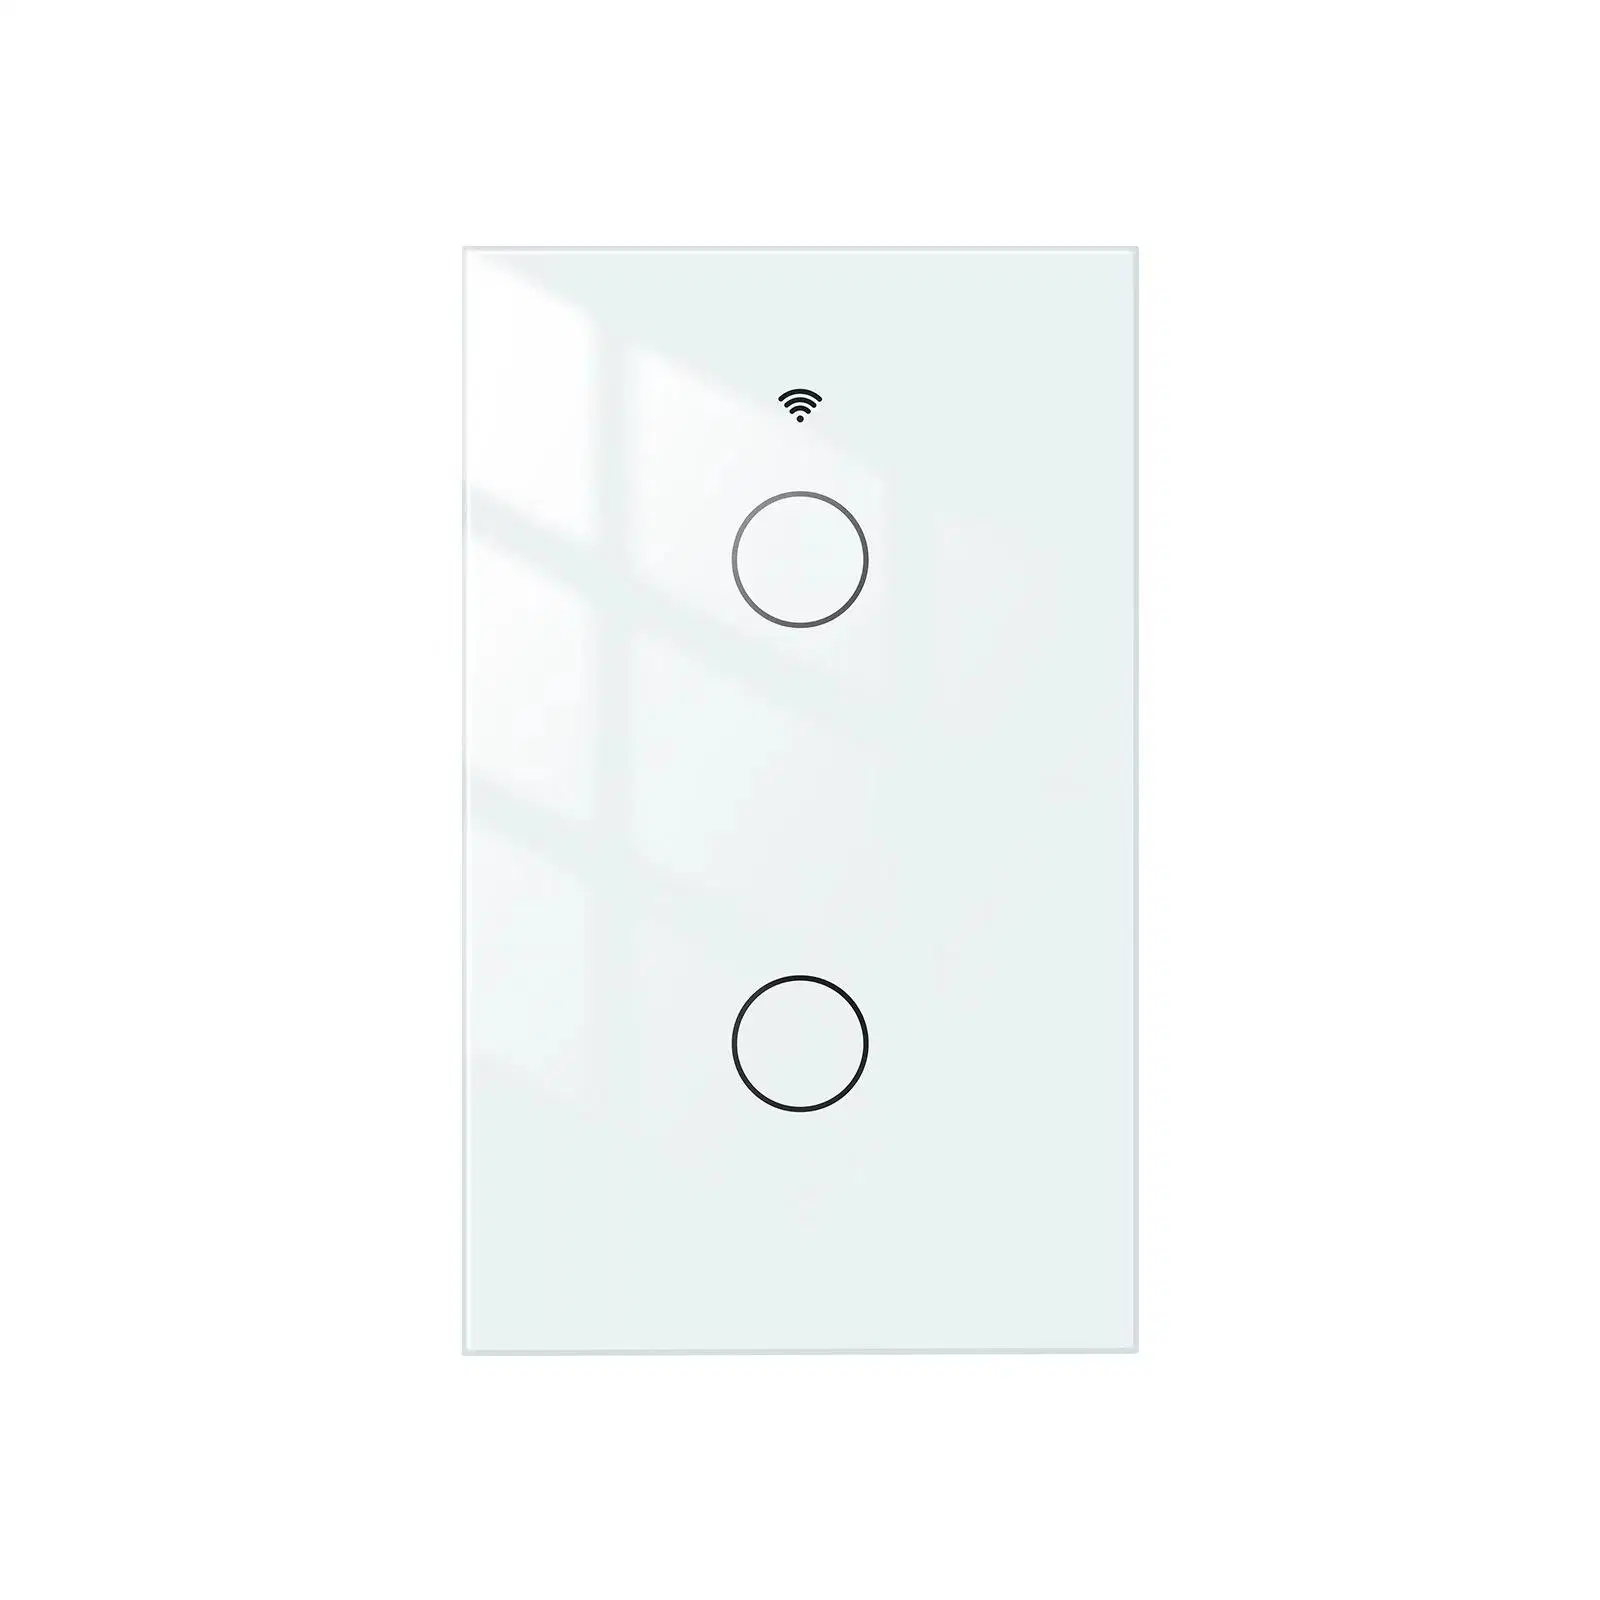 Tuya Smart Life WiFi Wall Light Touch Glass Panel Smart Switch 4 Gang Switch Work with Google Home Alexa with Neutral